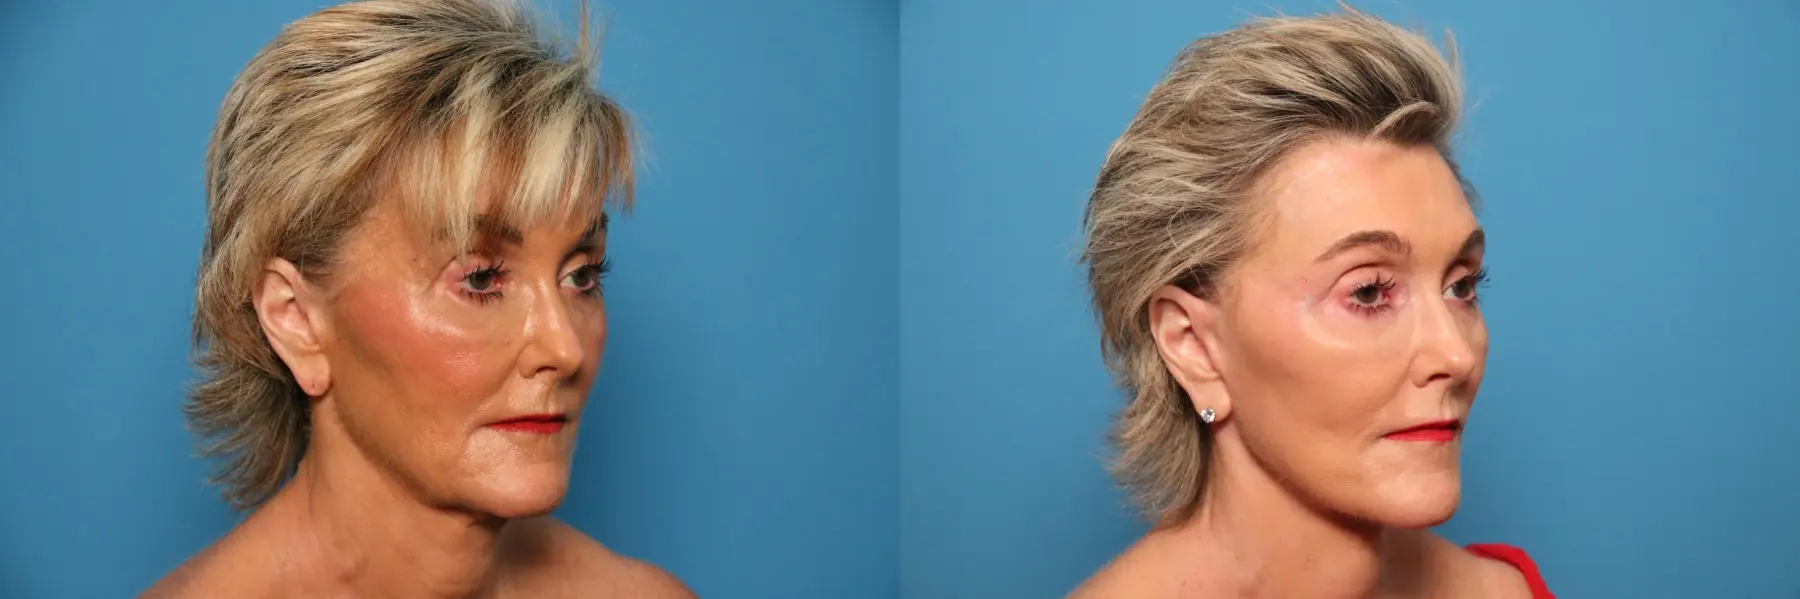 Facelift/Mini Facelift: Patient 6 - Before and After 4